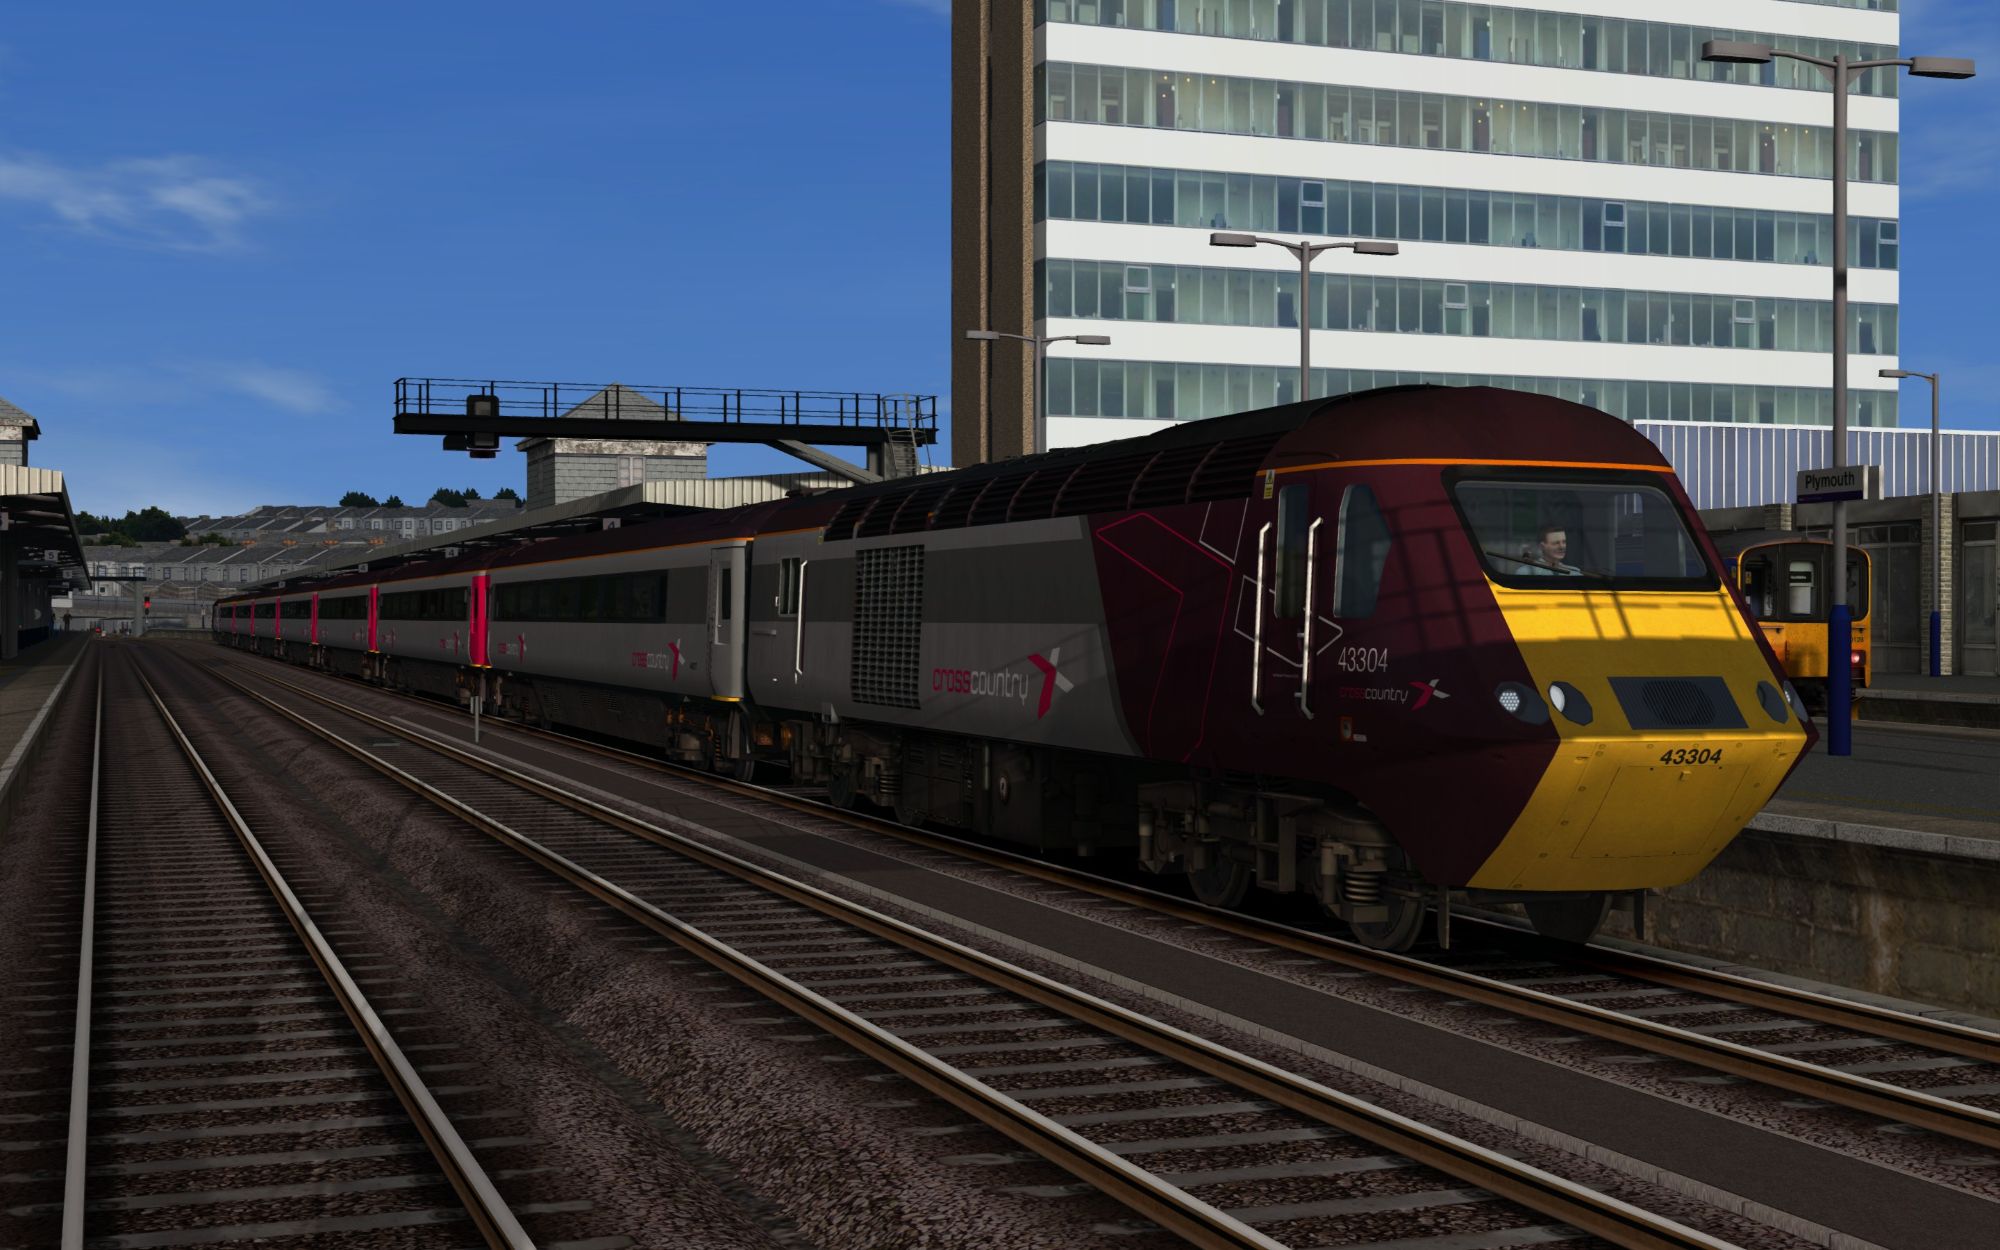 Image showing screenshot of the 1V58 - 0900 Glasgow Central to Penzance scenario